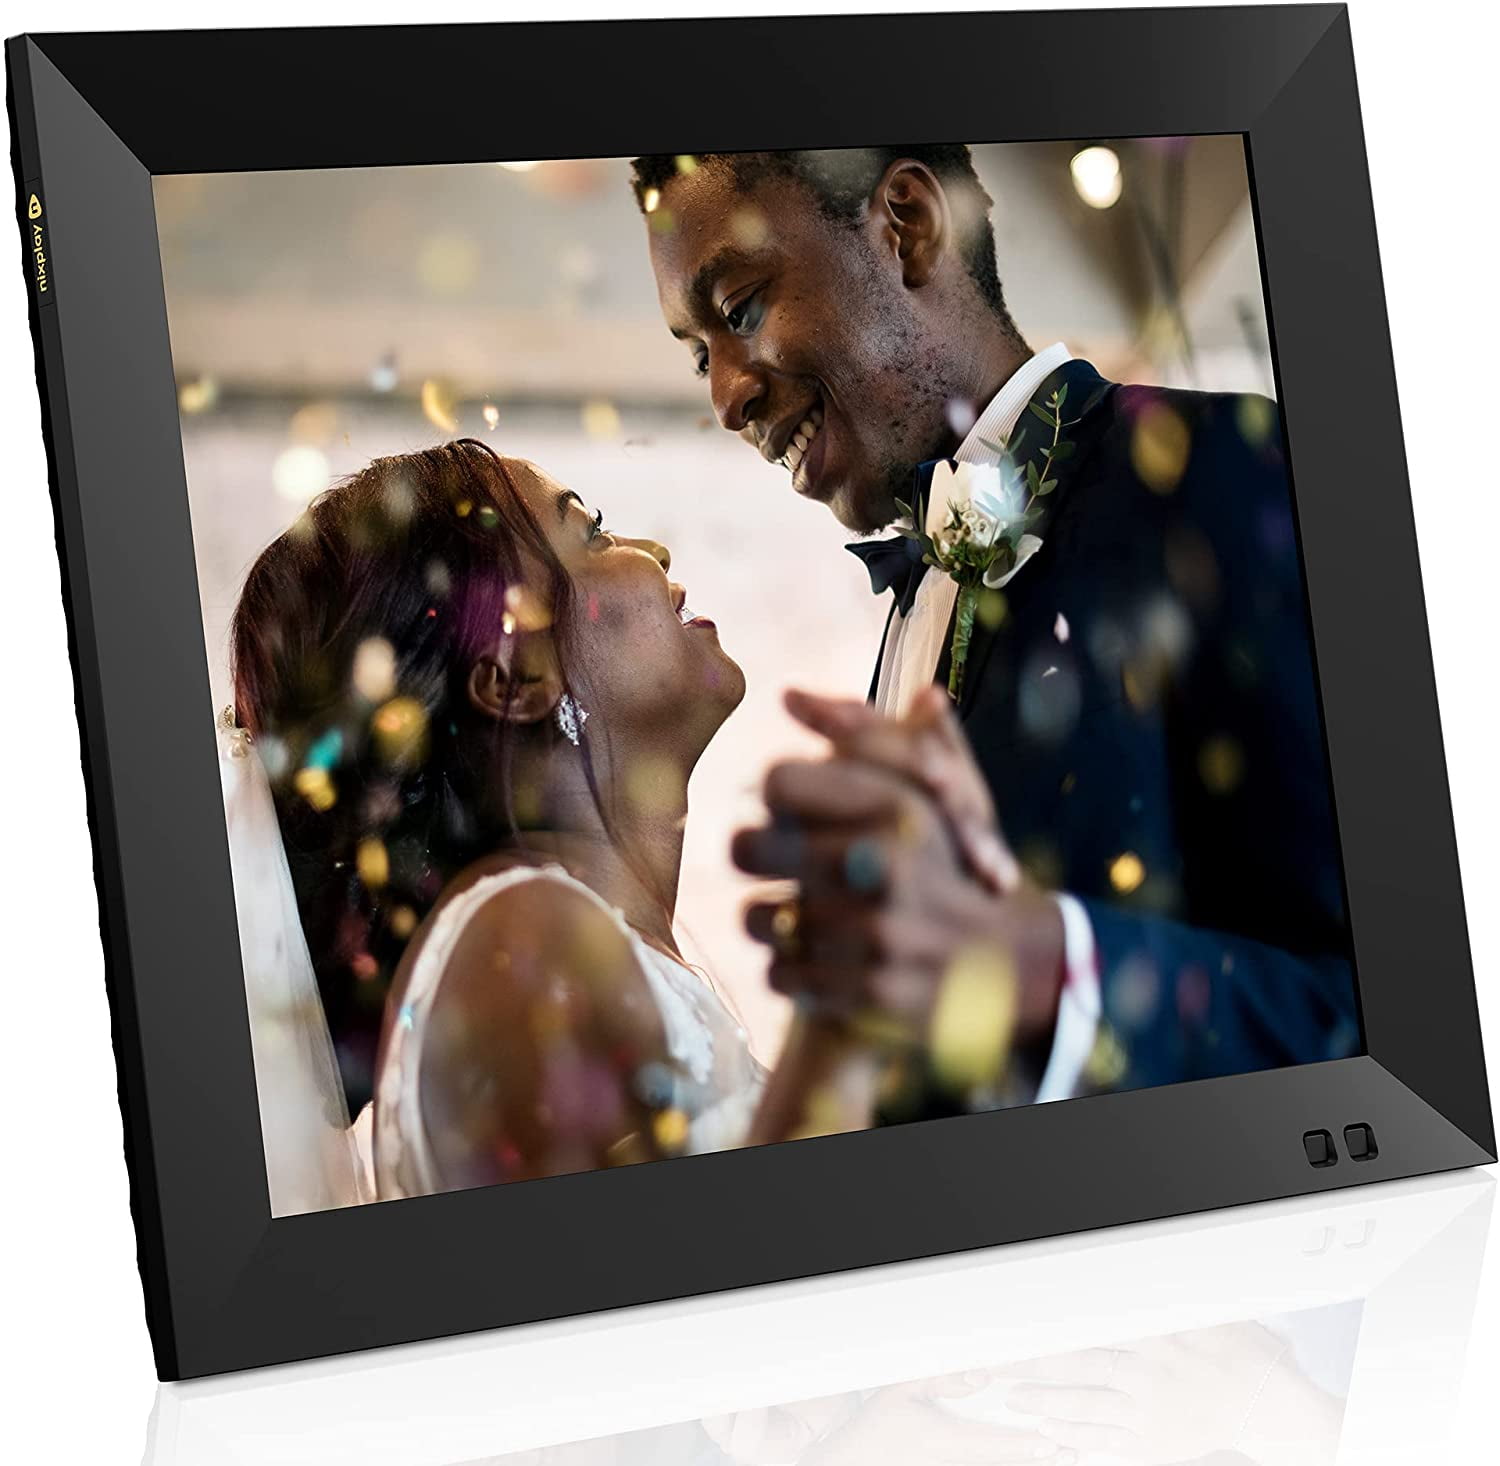 Nixplay 15 inch Smart Digital Photo Frame with WiFi (W15F) Black Share  Photos and Videos Instantly via Email or App